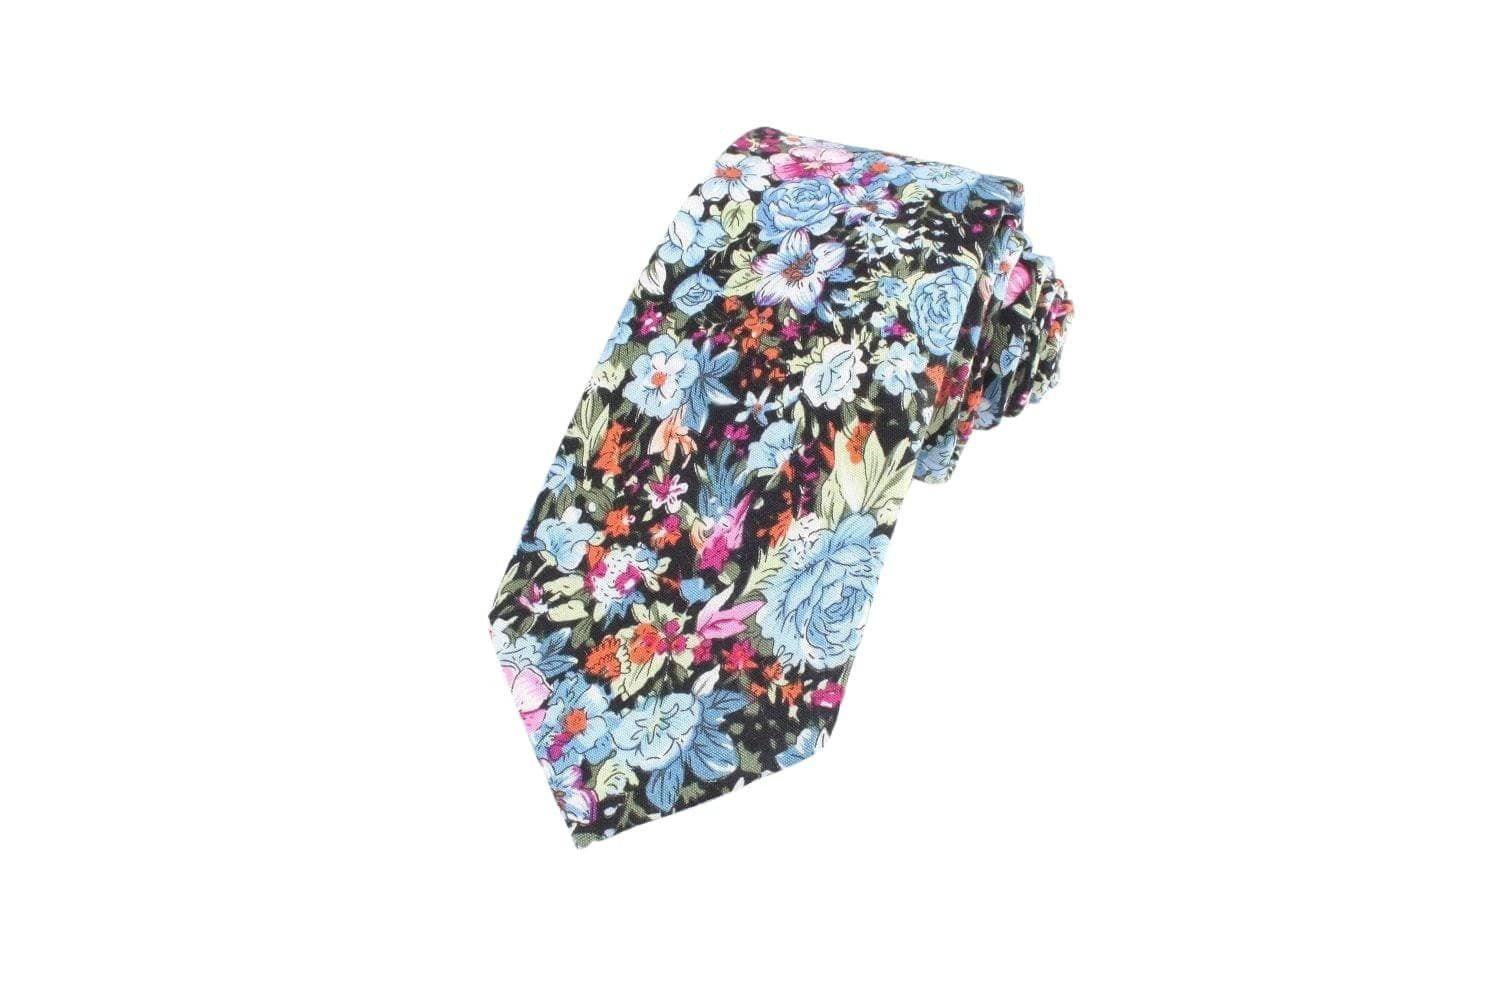 Floral Skinny Tie 2.36 LEO-Neckties-Men’s Floral Necktie for weddings and events, great for prom and anniversary gifts. Mens floral ties near me us ties tie shops cool ties skinny tie Cotton-Mytieshop. Skinny ties for weddings anniversaries. Father of bride. Groomsmen. Cool skinny neckties for men. Neckwear for prom, missions and fancy events. Gift ideas for men. Anniversaries ideas. Wedding aesthetics. Flower ties. Dry flower ties.